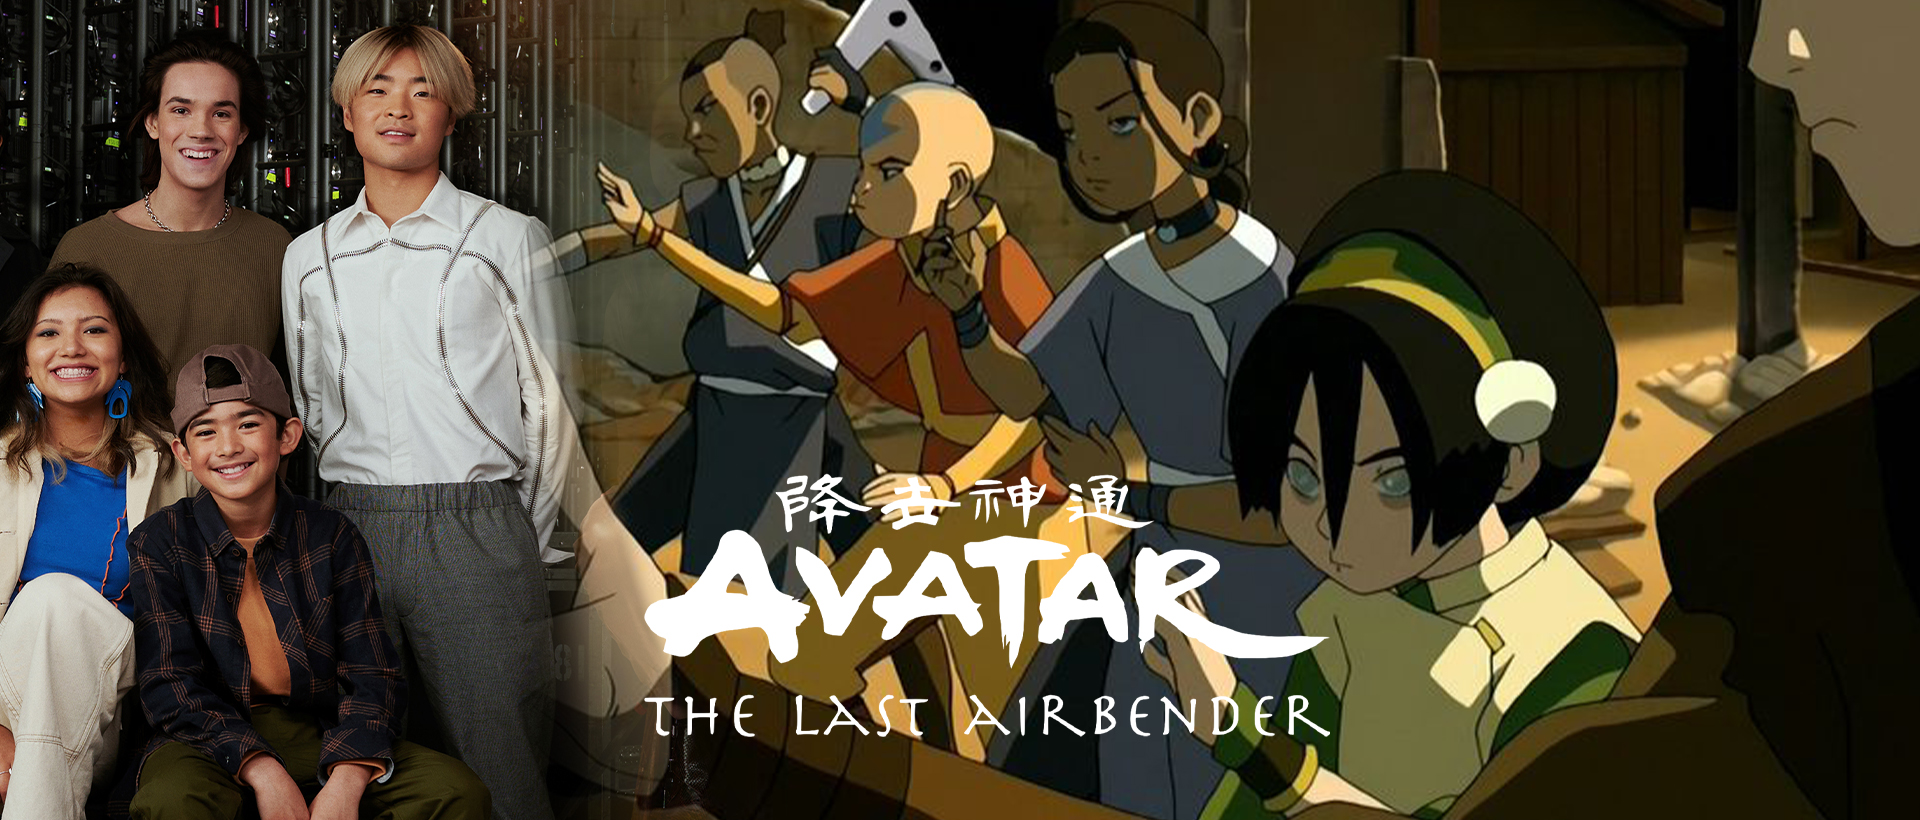 Avatar The Last Airbender 2 wallpaper  Anime wallpapers  13595